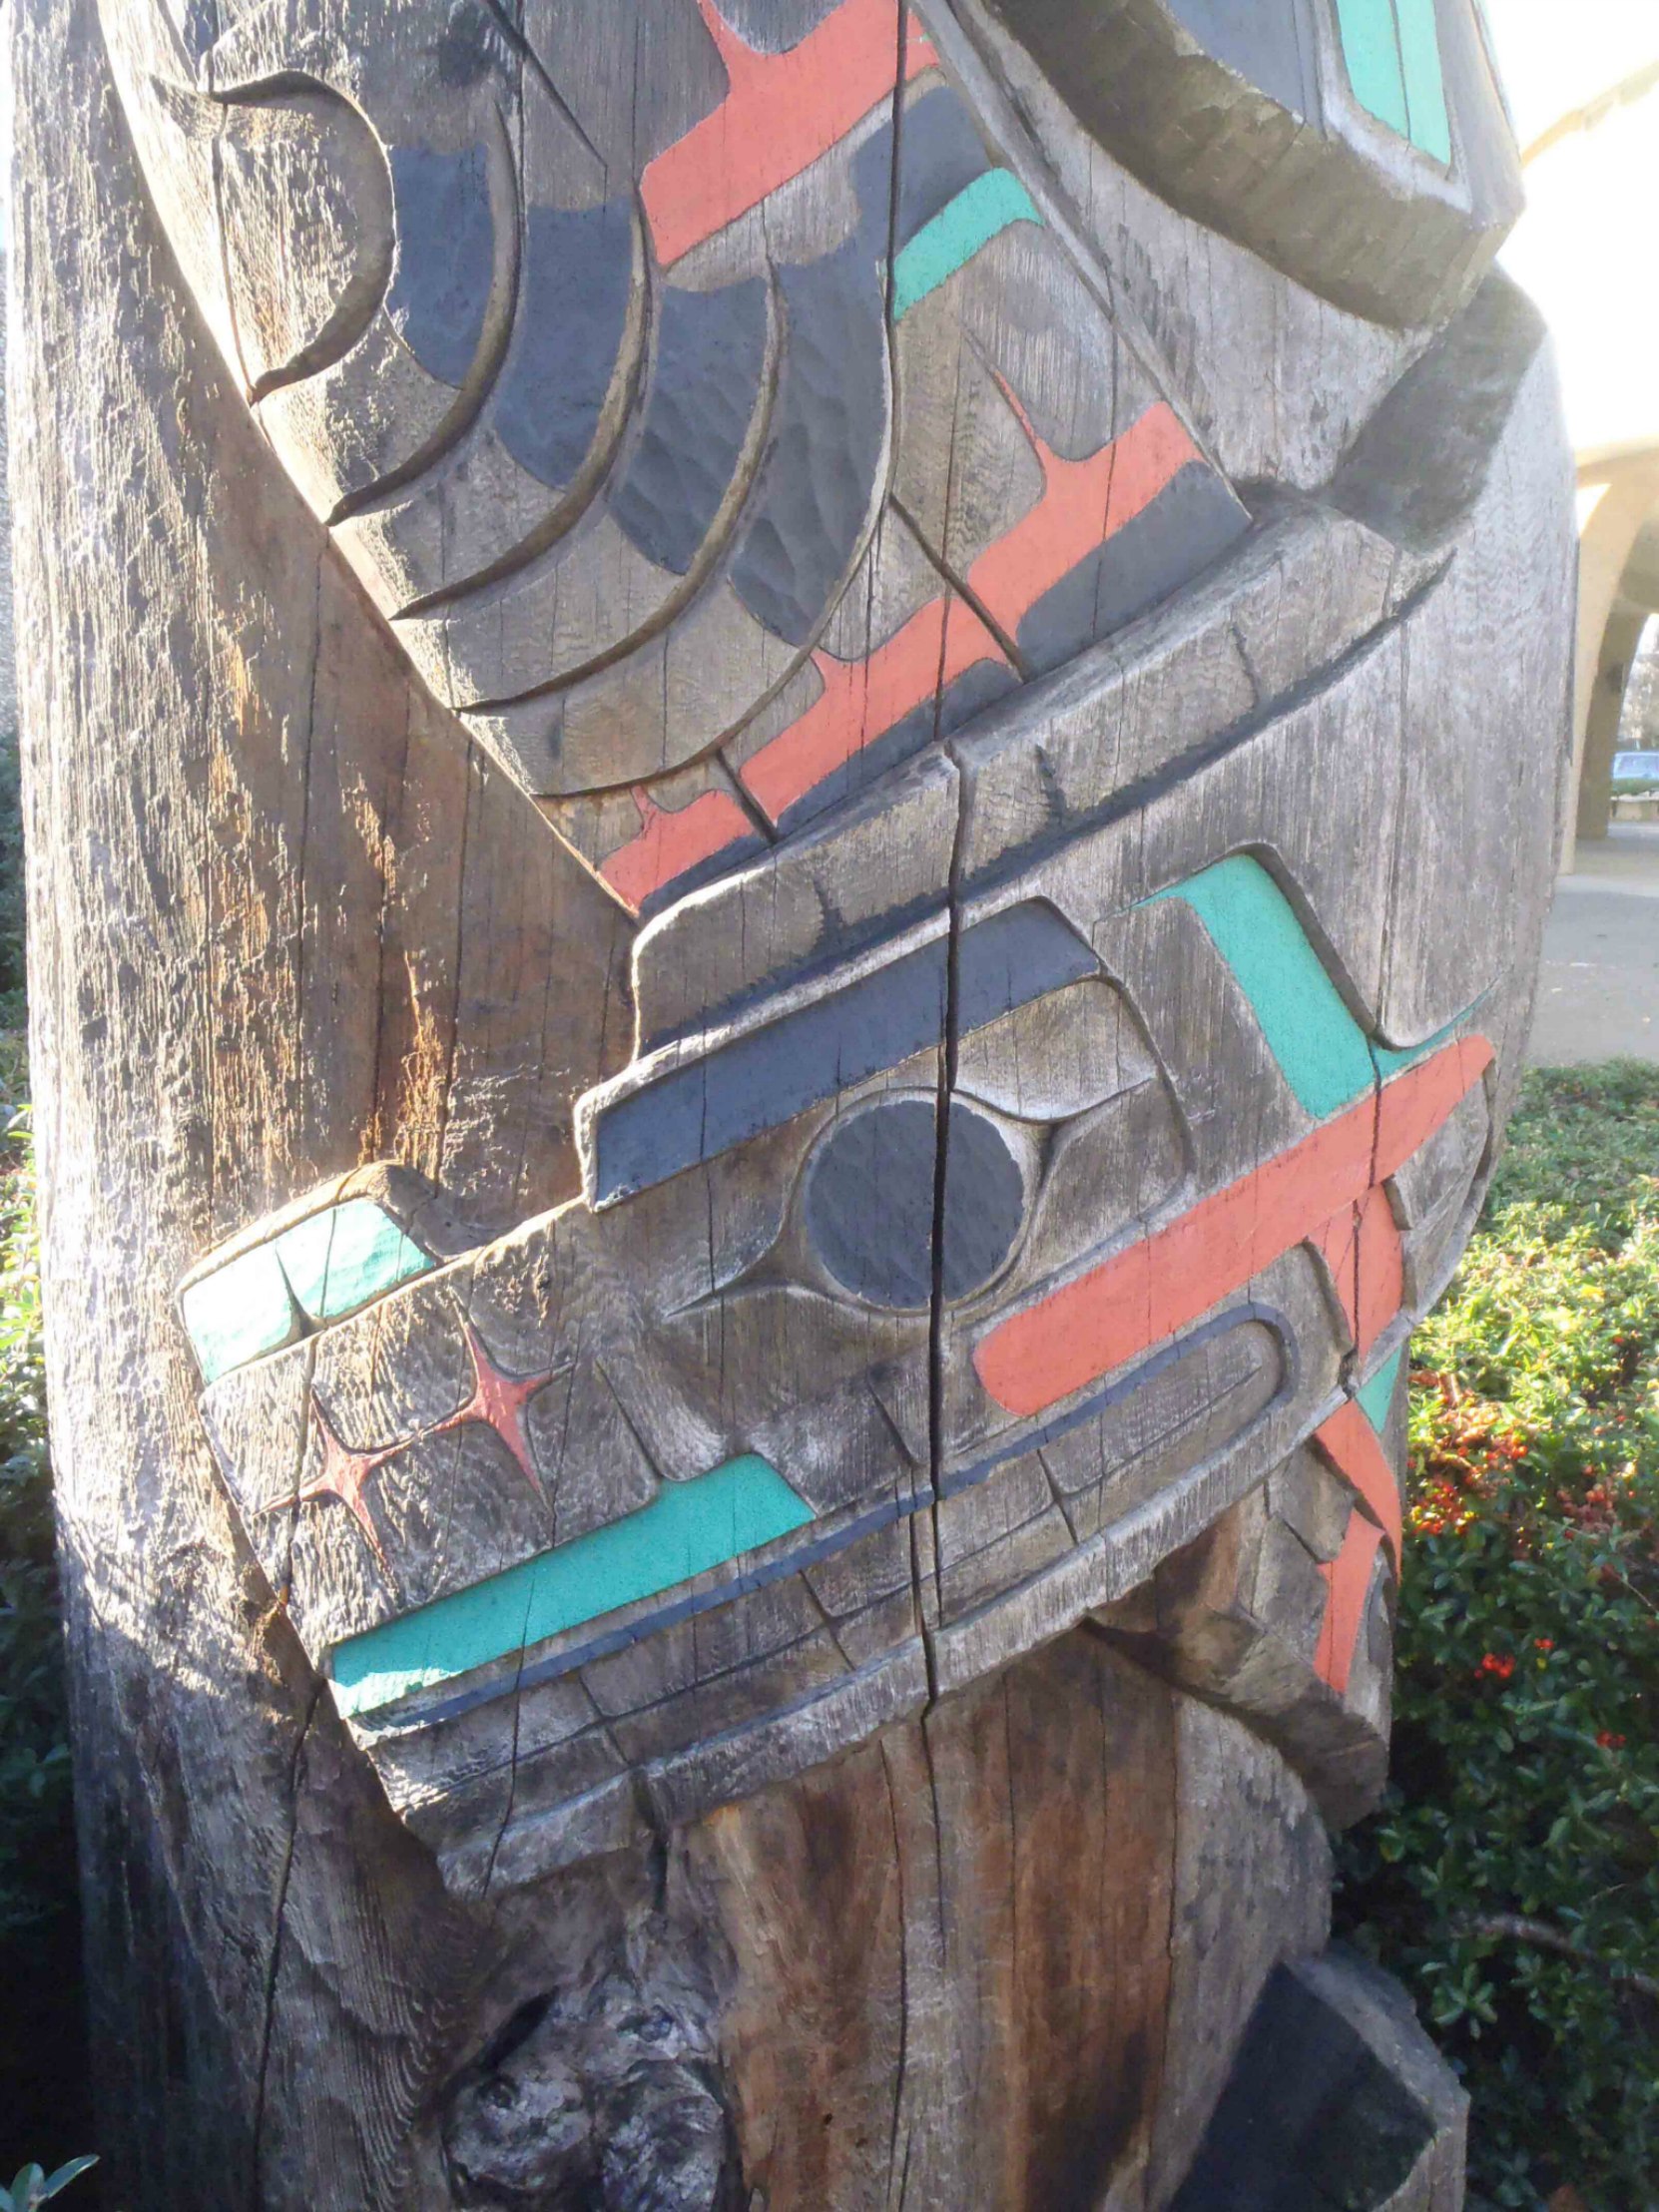 Peaceful Boundaries pole, Sea Serpent figure detail, outside Provincial Courthouse, Government Street, Duncan, B.C.